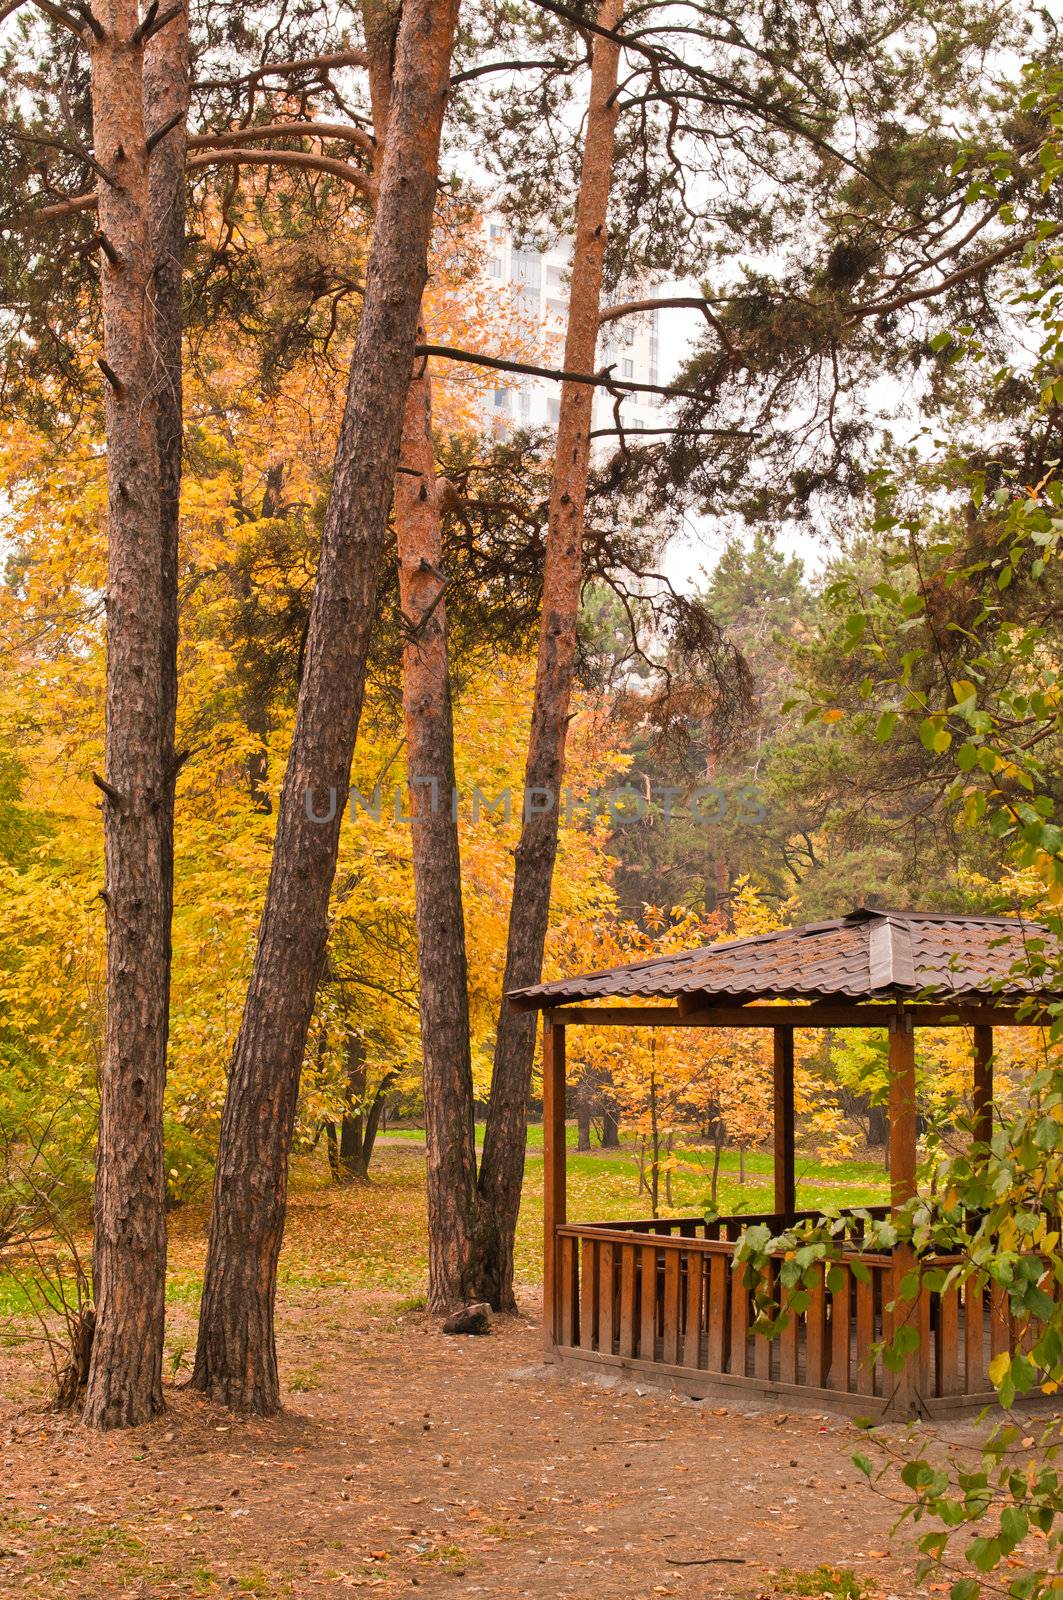 Wooden pavilion and various trees in the park at autumn vertical